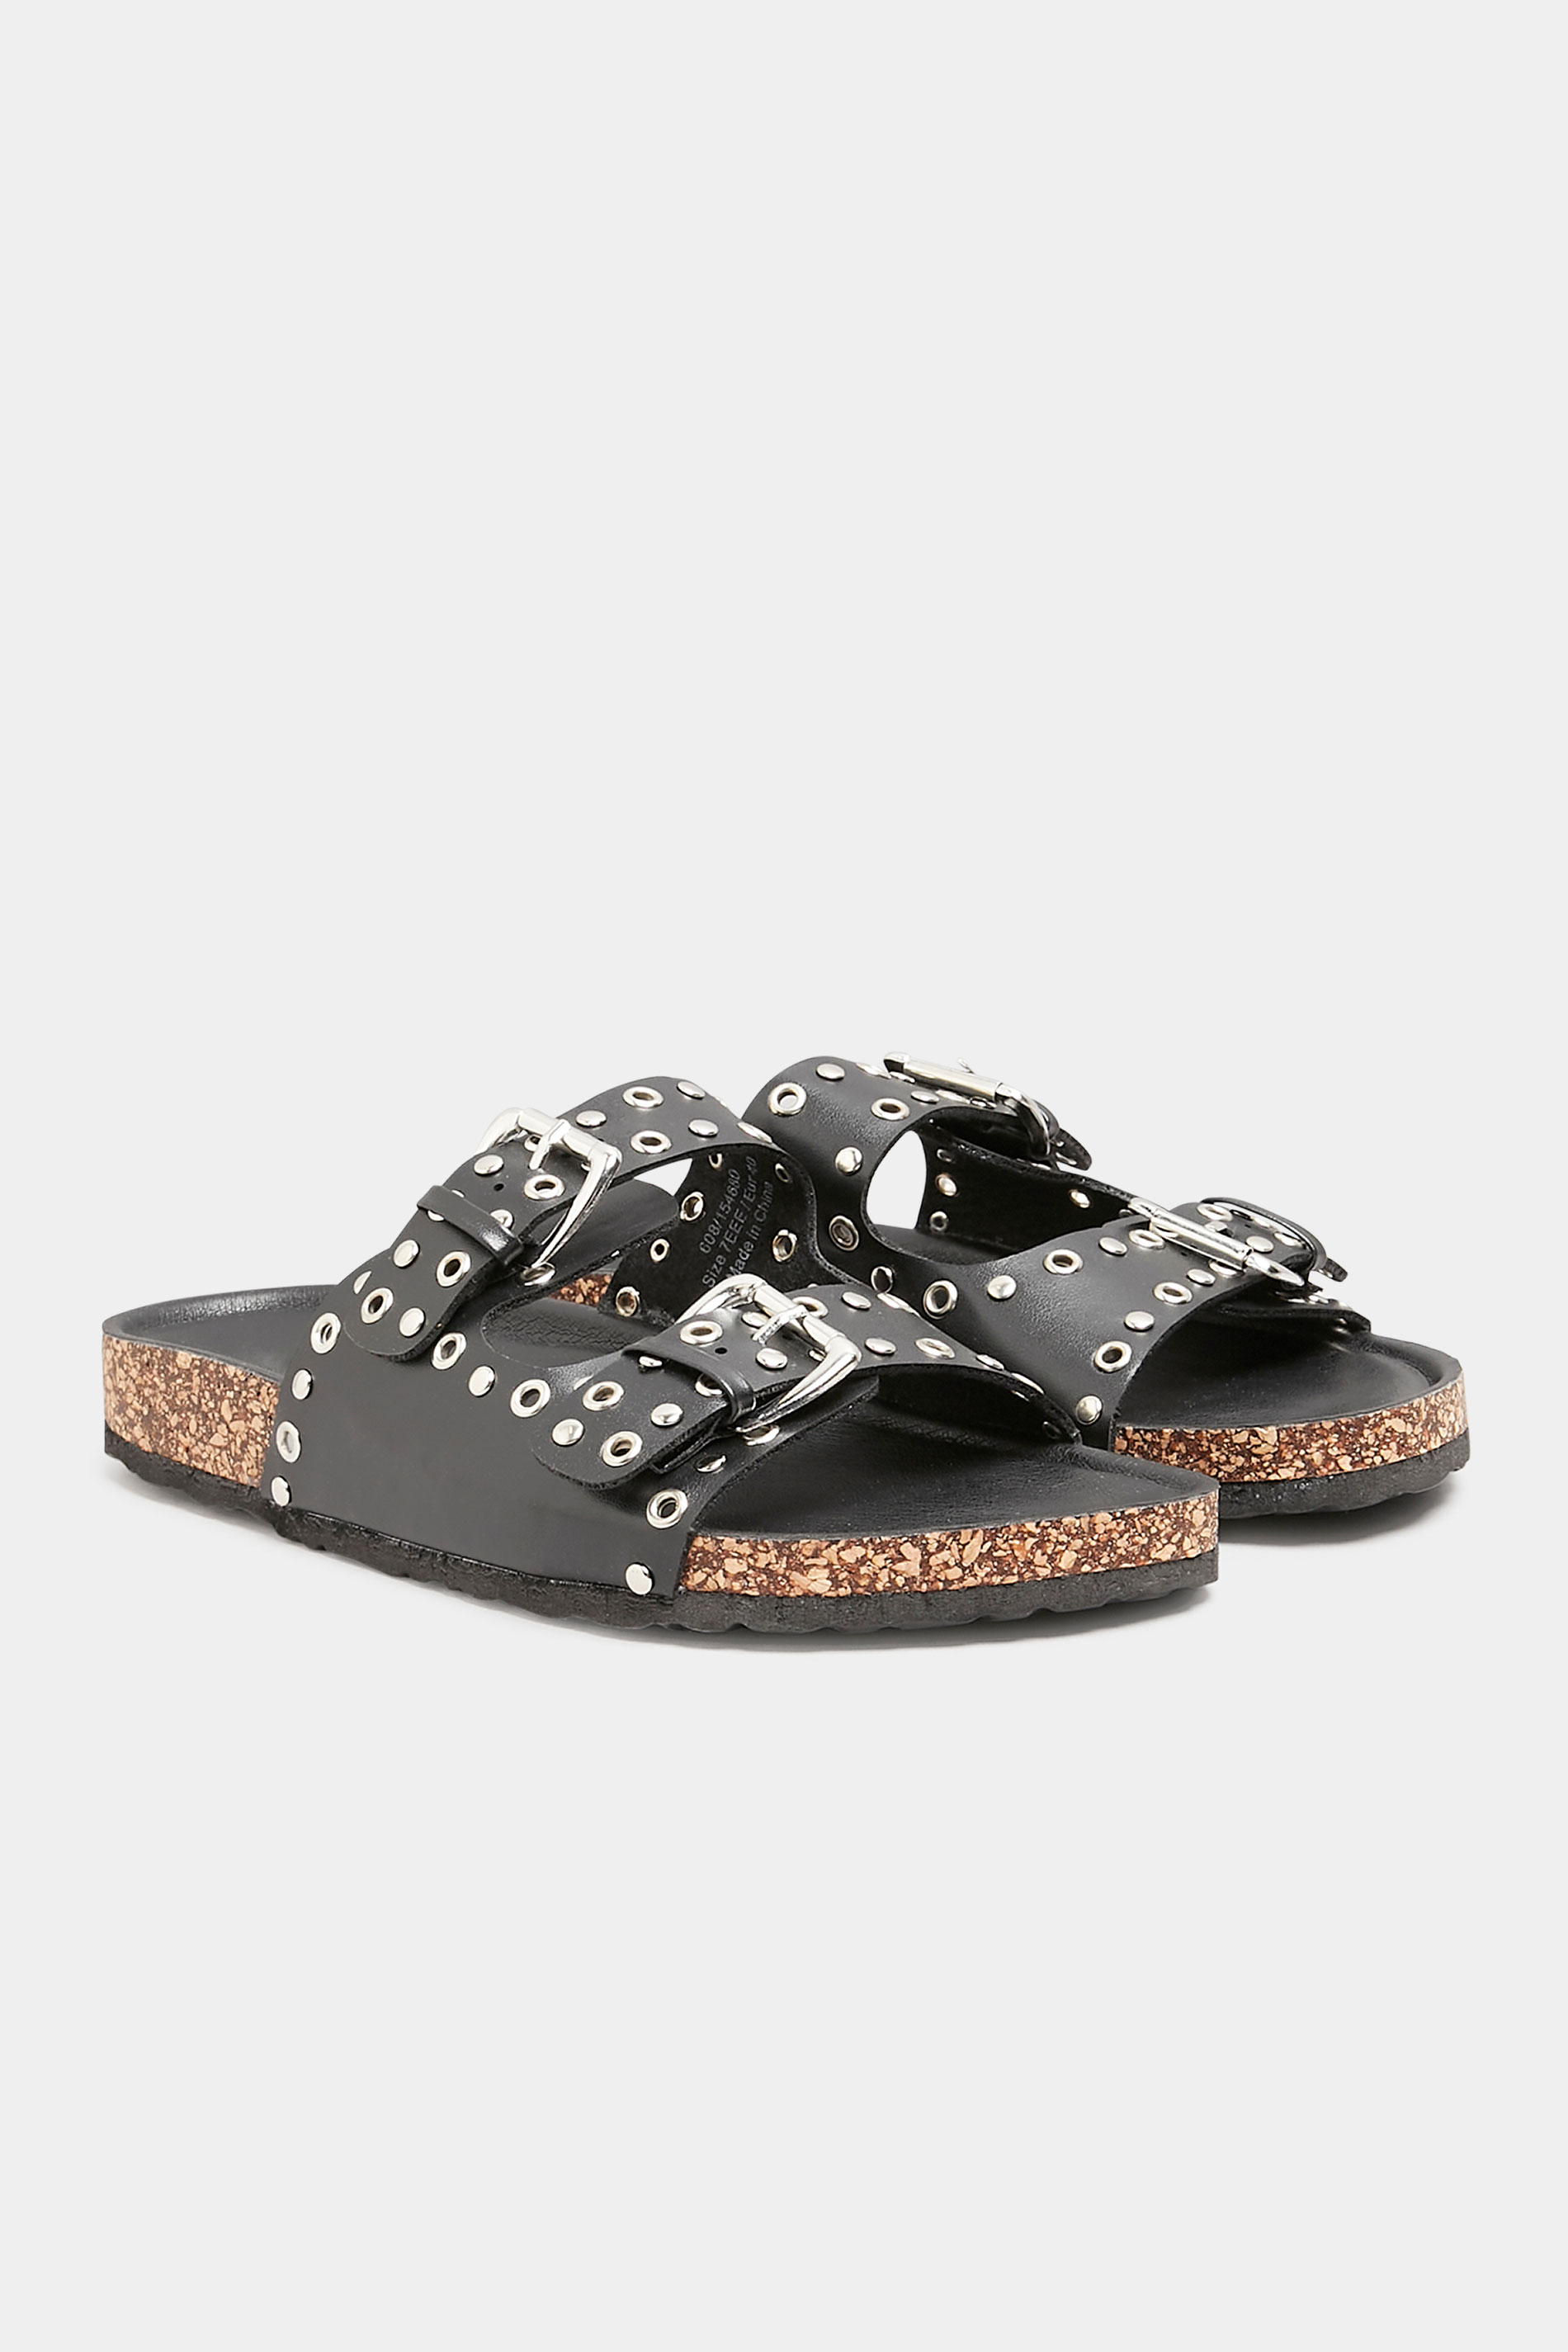 LTS Black Studded Buckle Strap Sandals In Standard Fit | Long Tall Sally 2